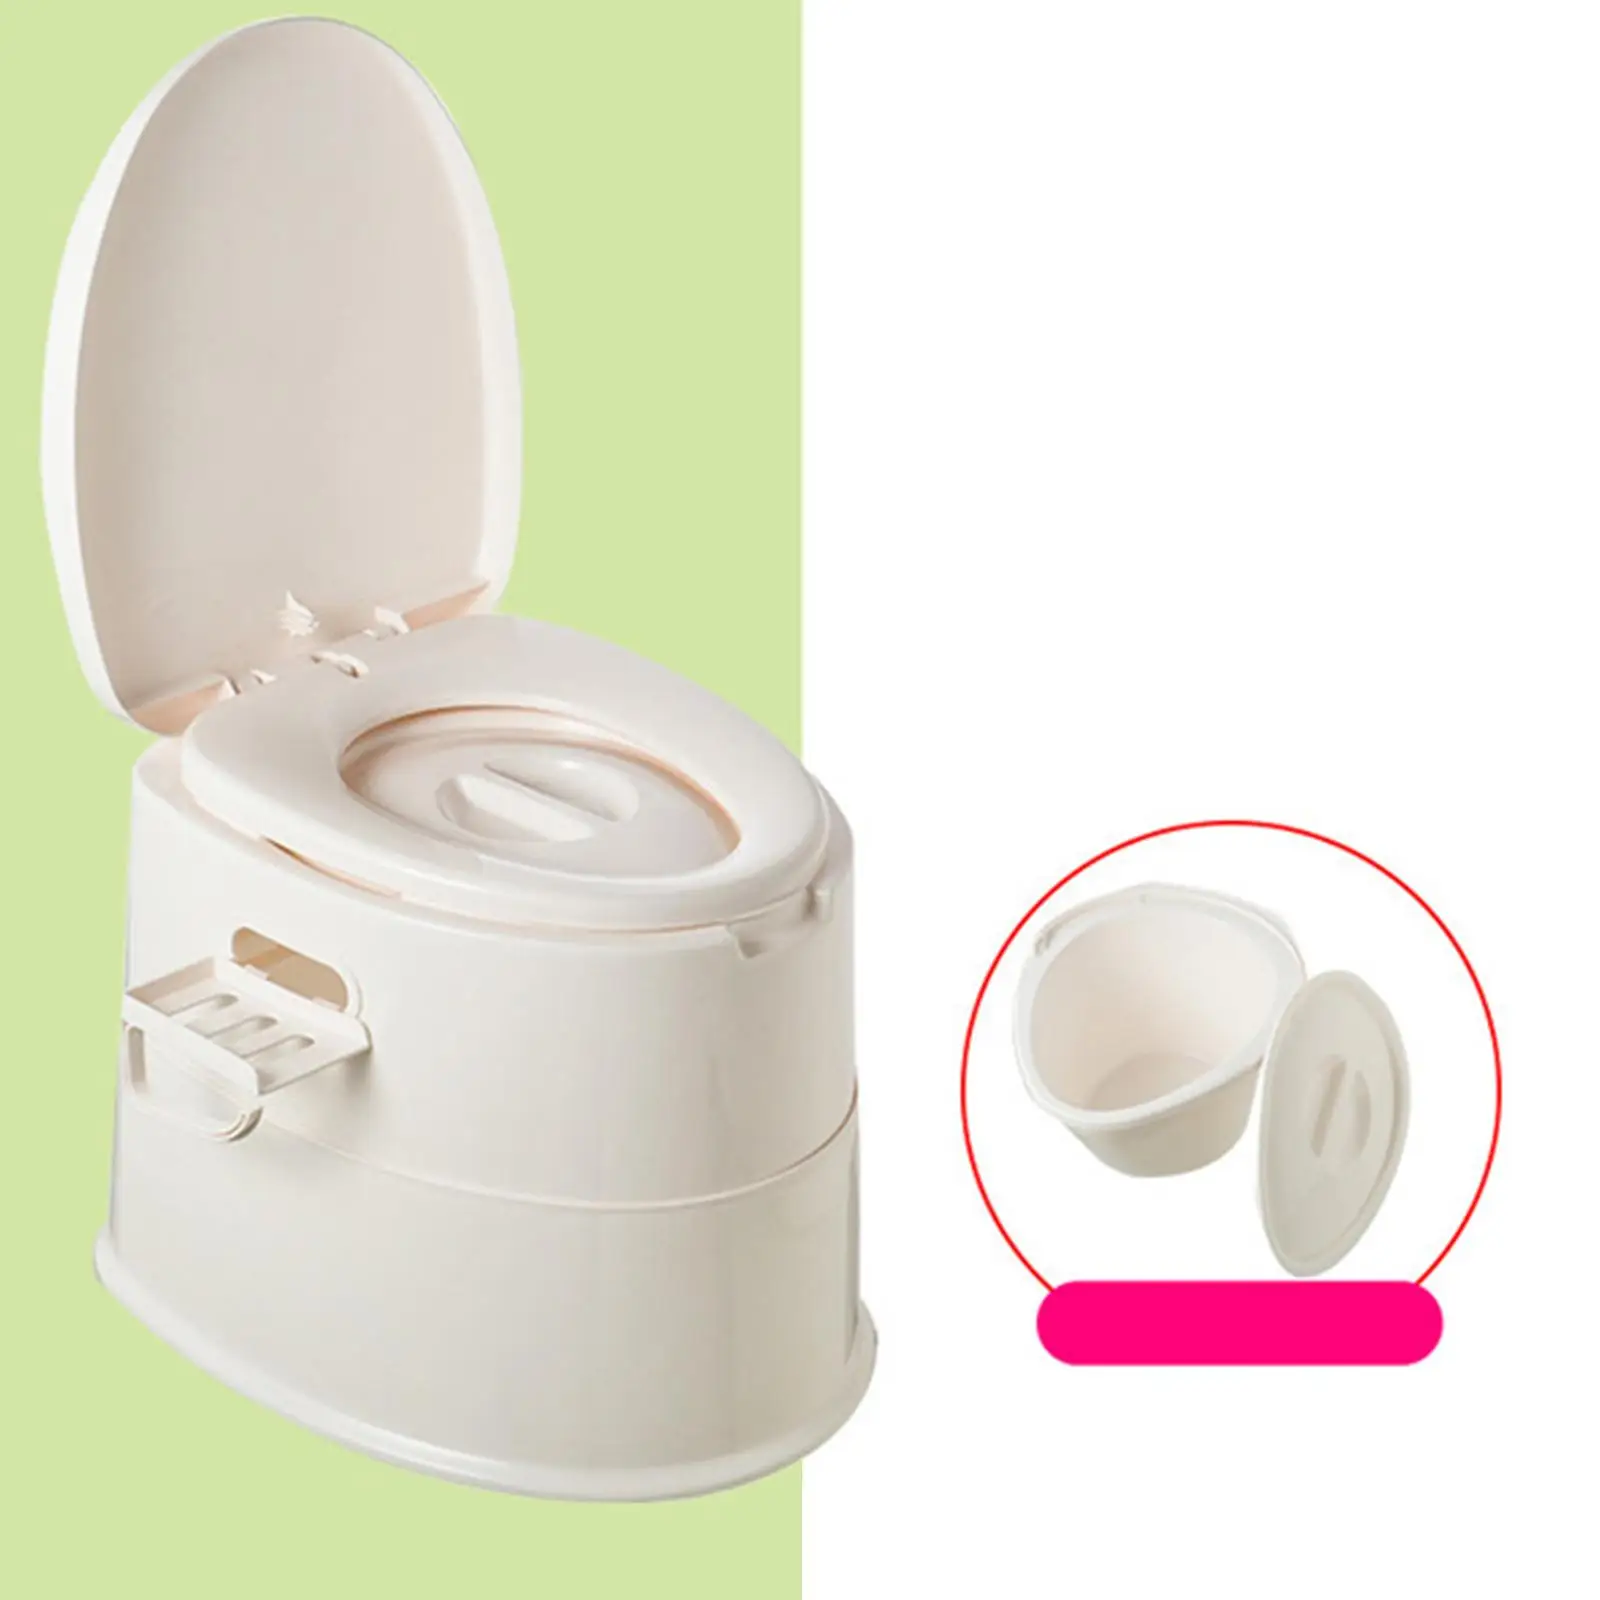 Travel Toilet Lightweight Removable Toilet Paper Holder Waterproof Sturdy Portable Toilet for Trips Camping Home Outdoor Indoor